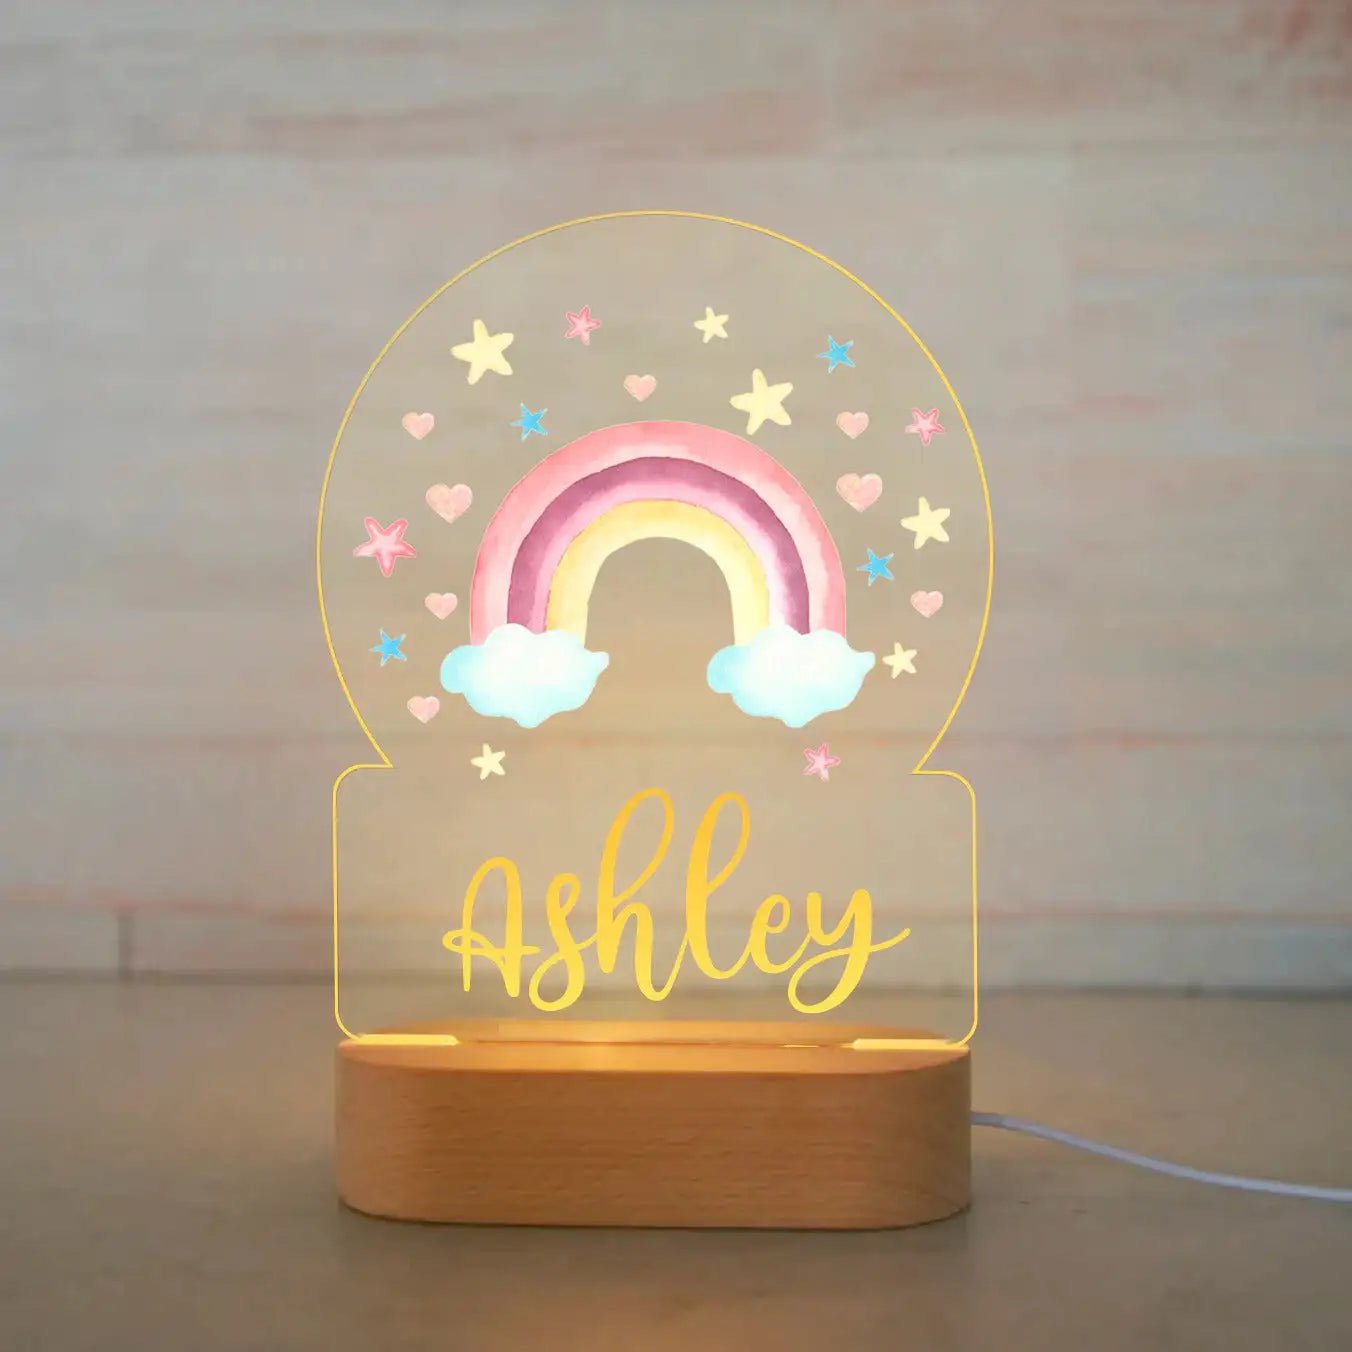 Customized Animal-themed Night Light for Kids - Personalized with Child's Name, Acrylic Lamp for Bedroom Decor Warm Light / 08Rainbow